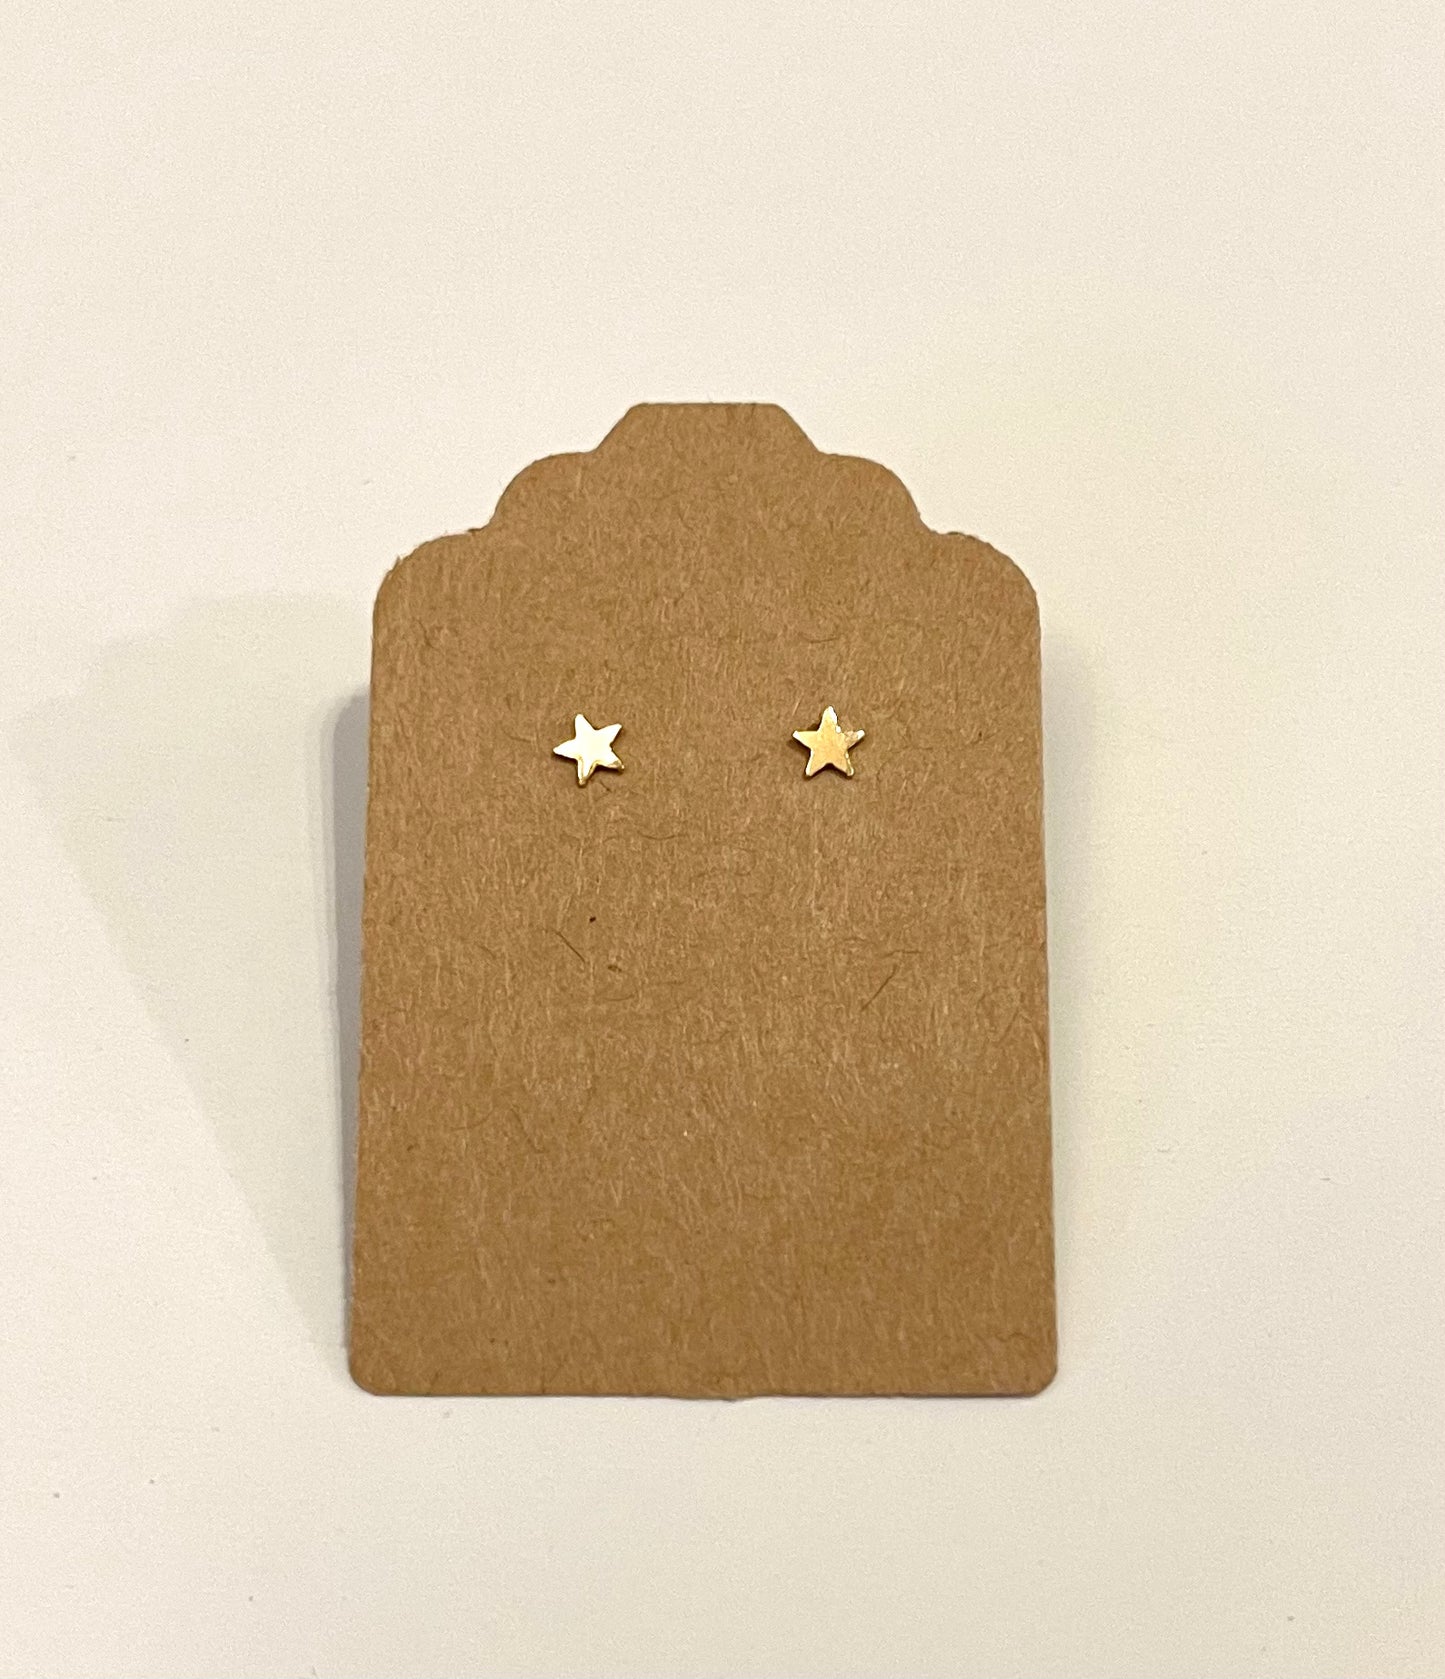 Tiny Gold Filled Stud Earrings